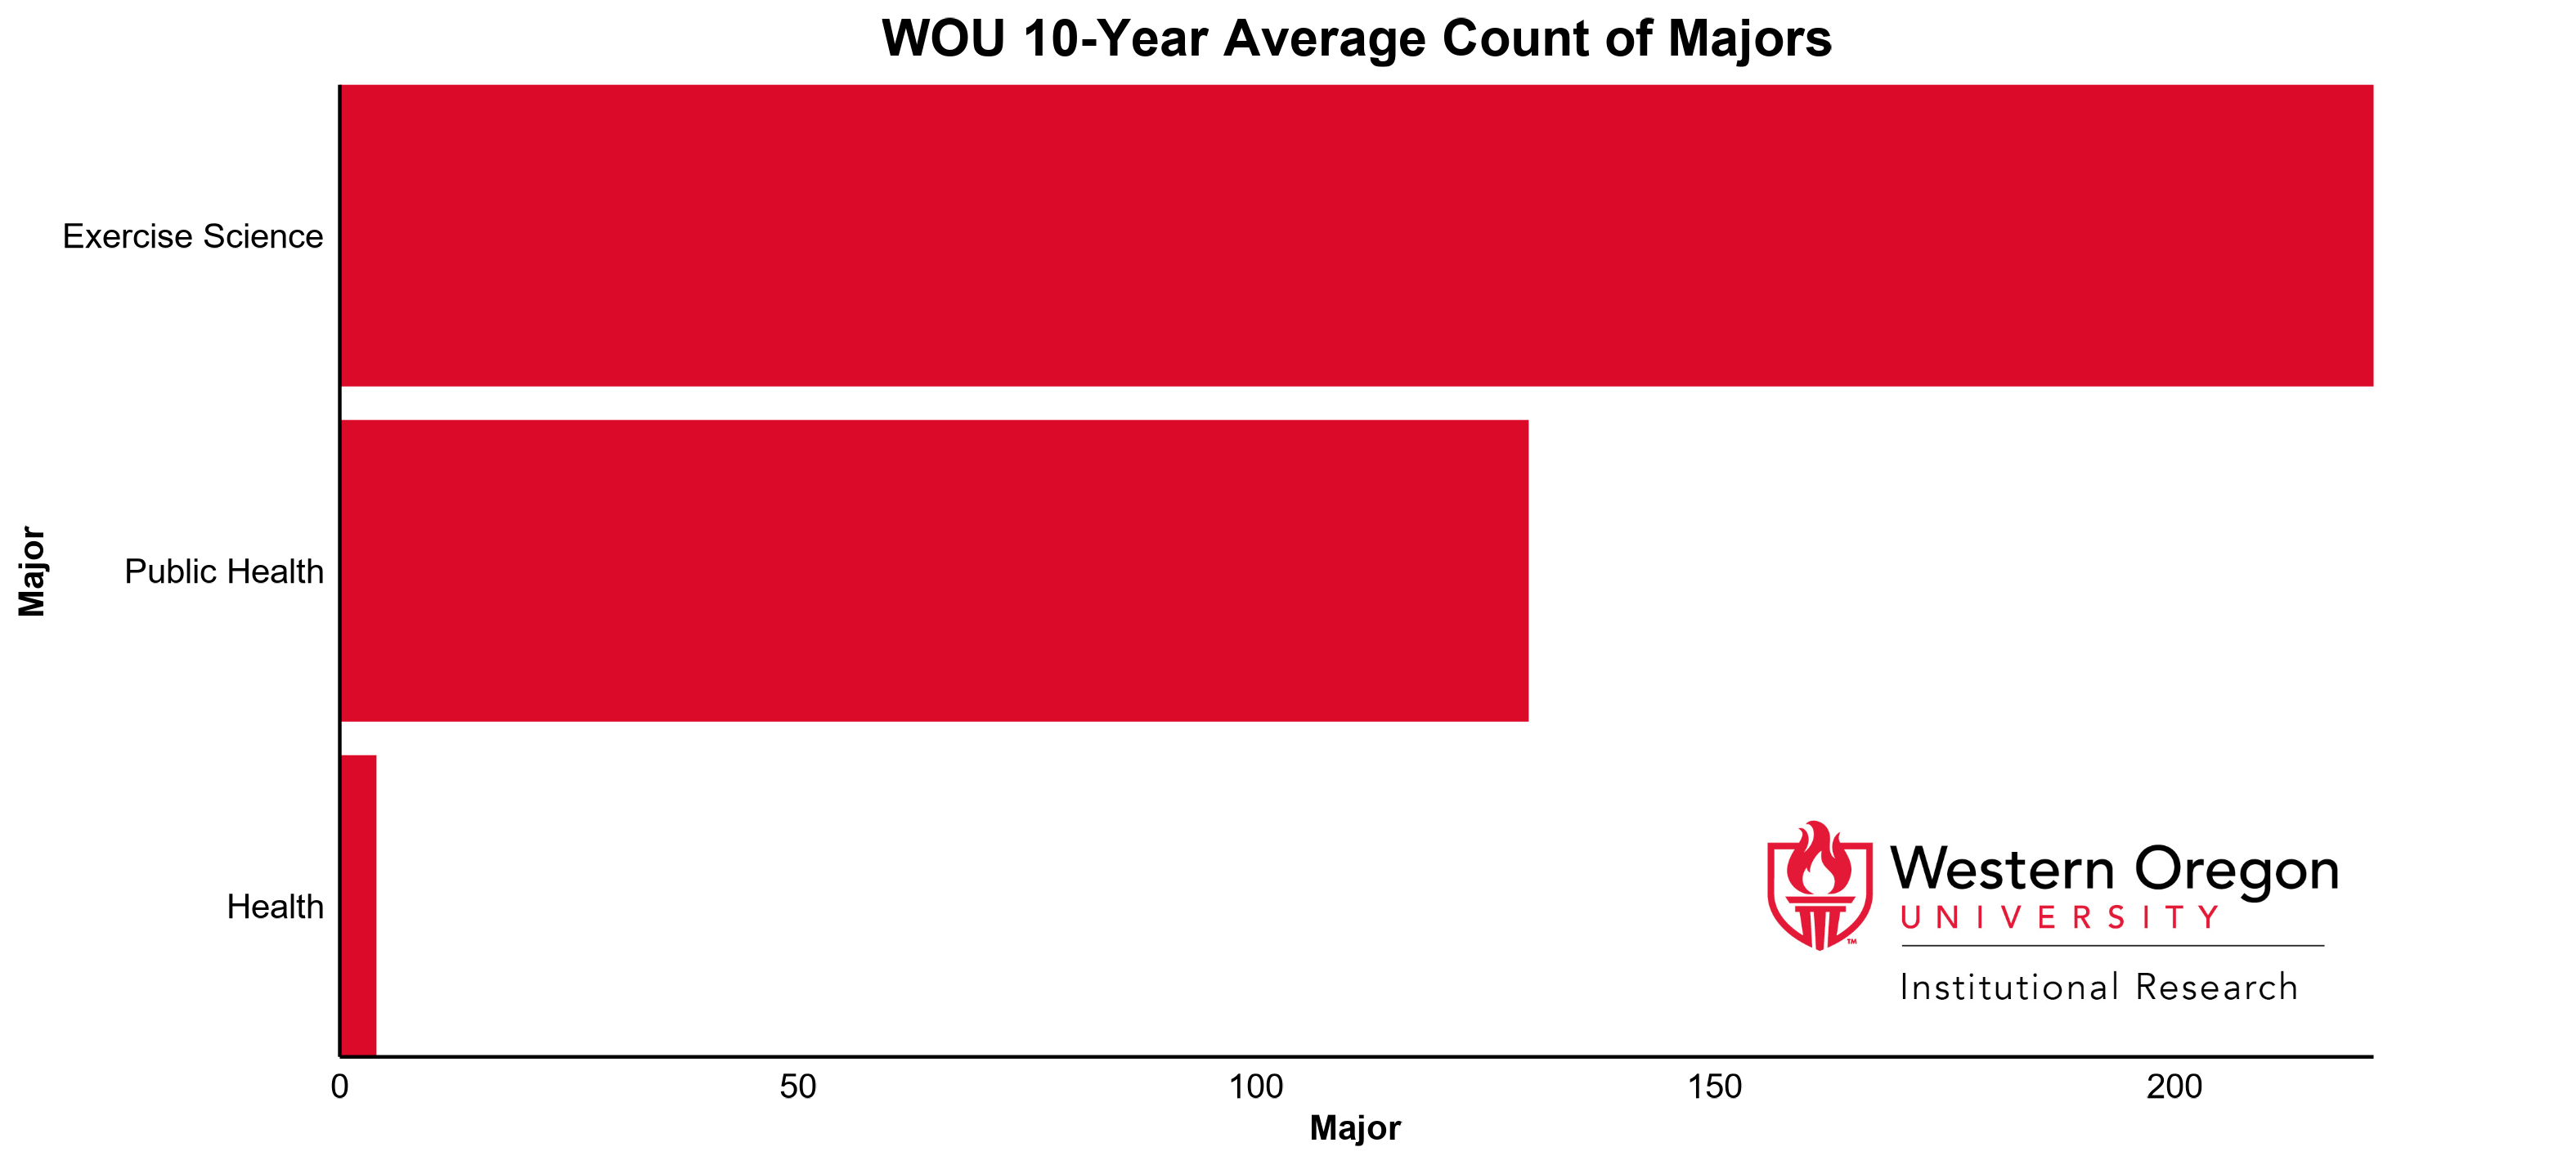 Bar graph of the 10-year average count of majors at WOU for the Health and Exercise Science division